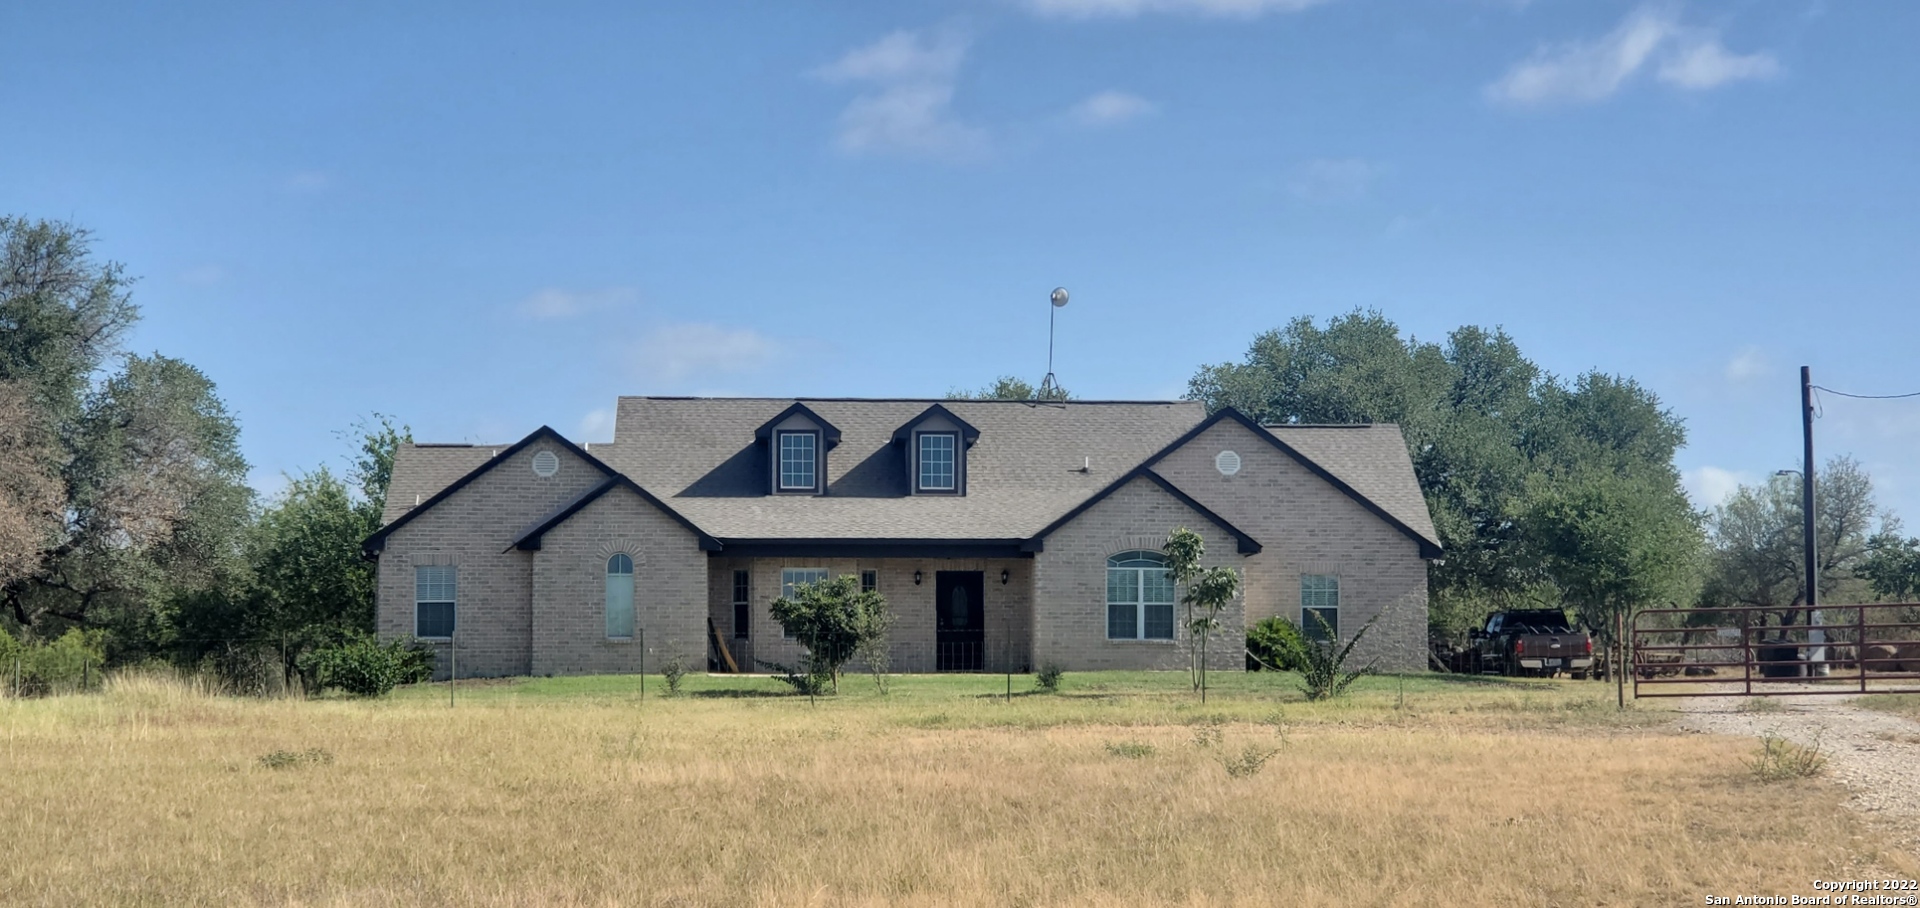 This is a beautiful, spacious 3 bedroom, 3 full bath home on 20 acres.  The home is located between Hondo and Castroville on Private Road 568, about 25 minutes from San Antonio. Entering, you are greeted with the dramatic living area of the home.  The 16' cathedral ceiling adds to this open concept.  The kitchen is separated from the living room with a wide, sit-down bar which is made for entertaining.  The kitchen is the real "Heart of the Home" - it has large counter tops and many cabinets - room for everything here.   The large pantry and separate laundry area are conveniently located in the kitchen.   The dining room is next to the kitchen. Your dining table and china cabinet will fit with room to spare.  The Master bedroom is huge and very inviting with plenty of room for dressers, couches and big beds.  The Master bath has a separate garden tub, a beautiful walk-in shower and a private toilet area.  The guest bedroom also has its own full bathroom.  The 3rd bedroom is right next to the normal guest bathroom. The large back porch/patio makes it easy to enjoy your property.  There is a large storage building which gives you a good place to store lawn care equipment, etc.  The 20 acres surrounding the home has been planted to improved grasses for hay baling or grazing.  There is a good metal barn, large enough for you tractor and other ranching equipment.  The 19 acres are appraised as Agricultural Property for tax purposes.  The entire acreage is well-fenced with some cross fencing.